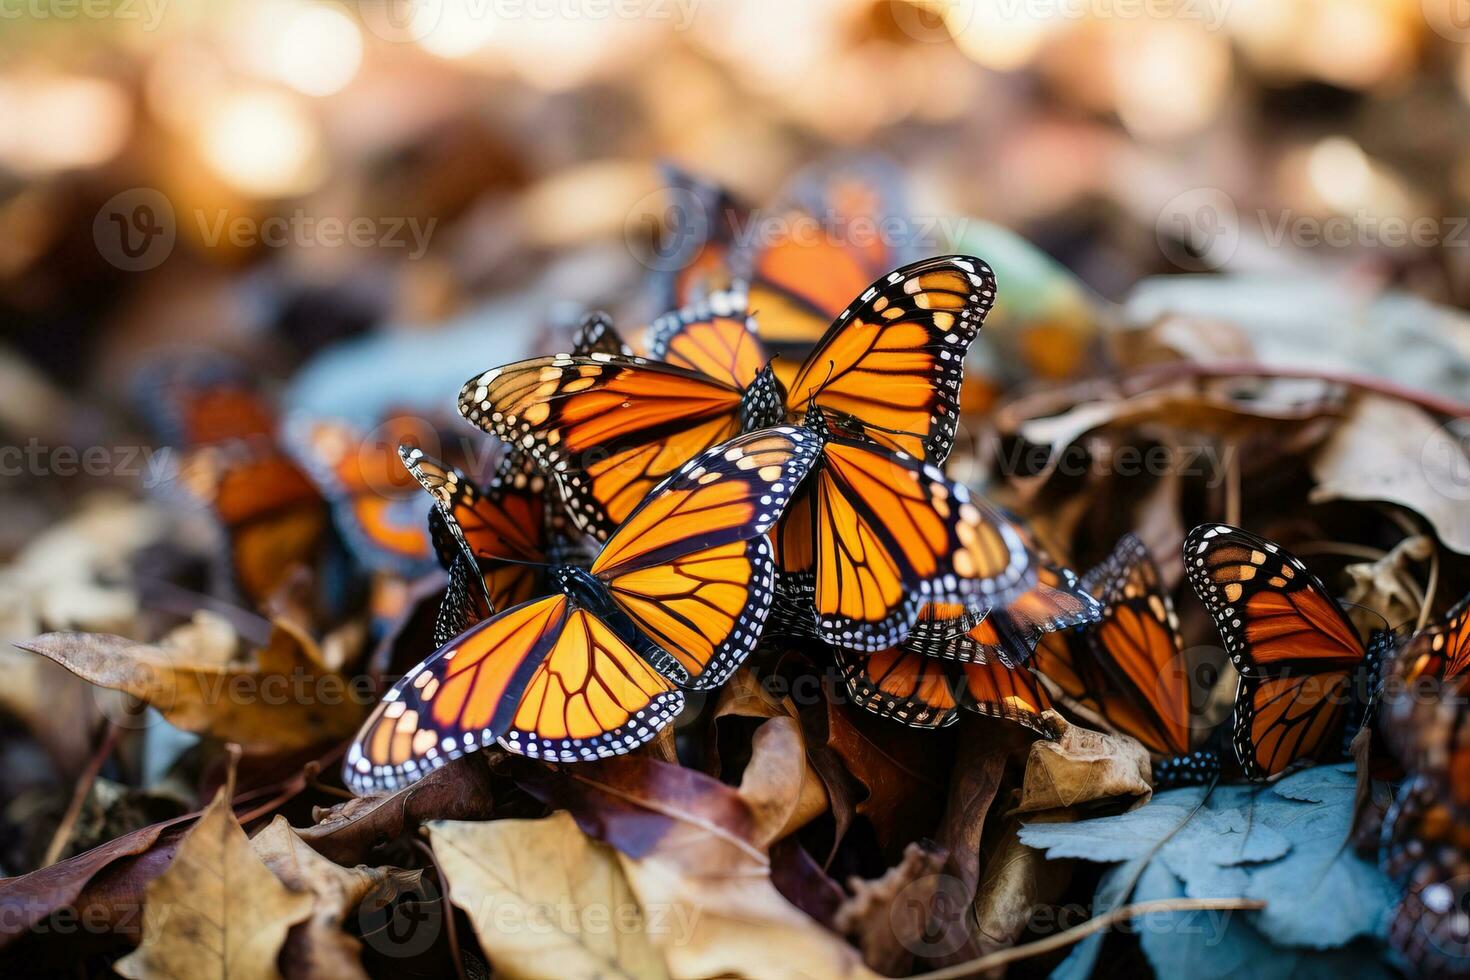 A mesmerizing close-up shot of a cluster of Monarch butterflies background with empty space for text photo